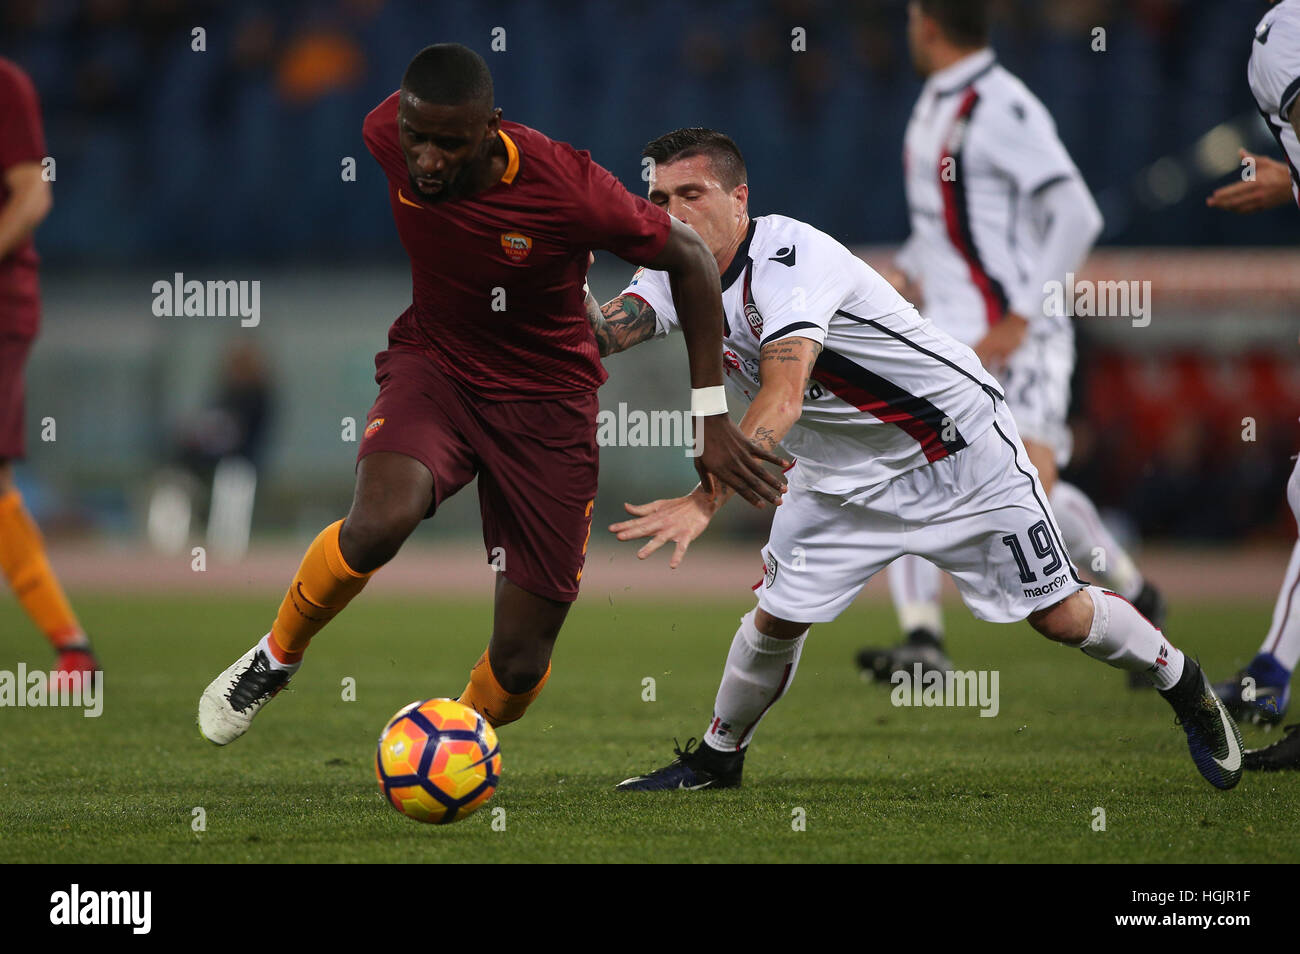 Rome, Italy. Roma versus Cagliari during the 2017 football series. Rudiger and Murru in action during the match. Credit: marco iacobucci/Alamy Live News Stock Photo